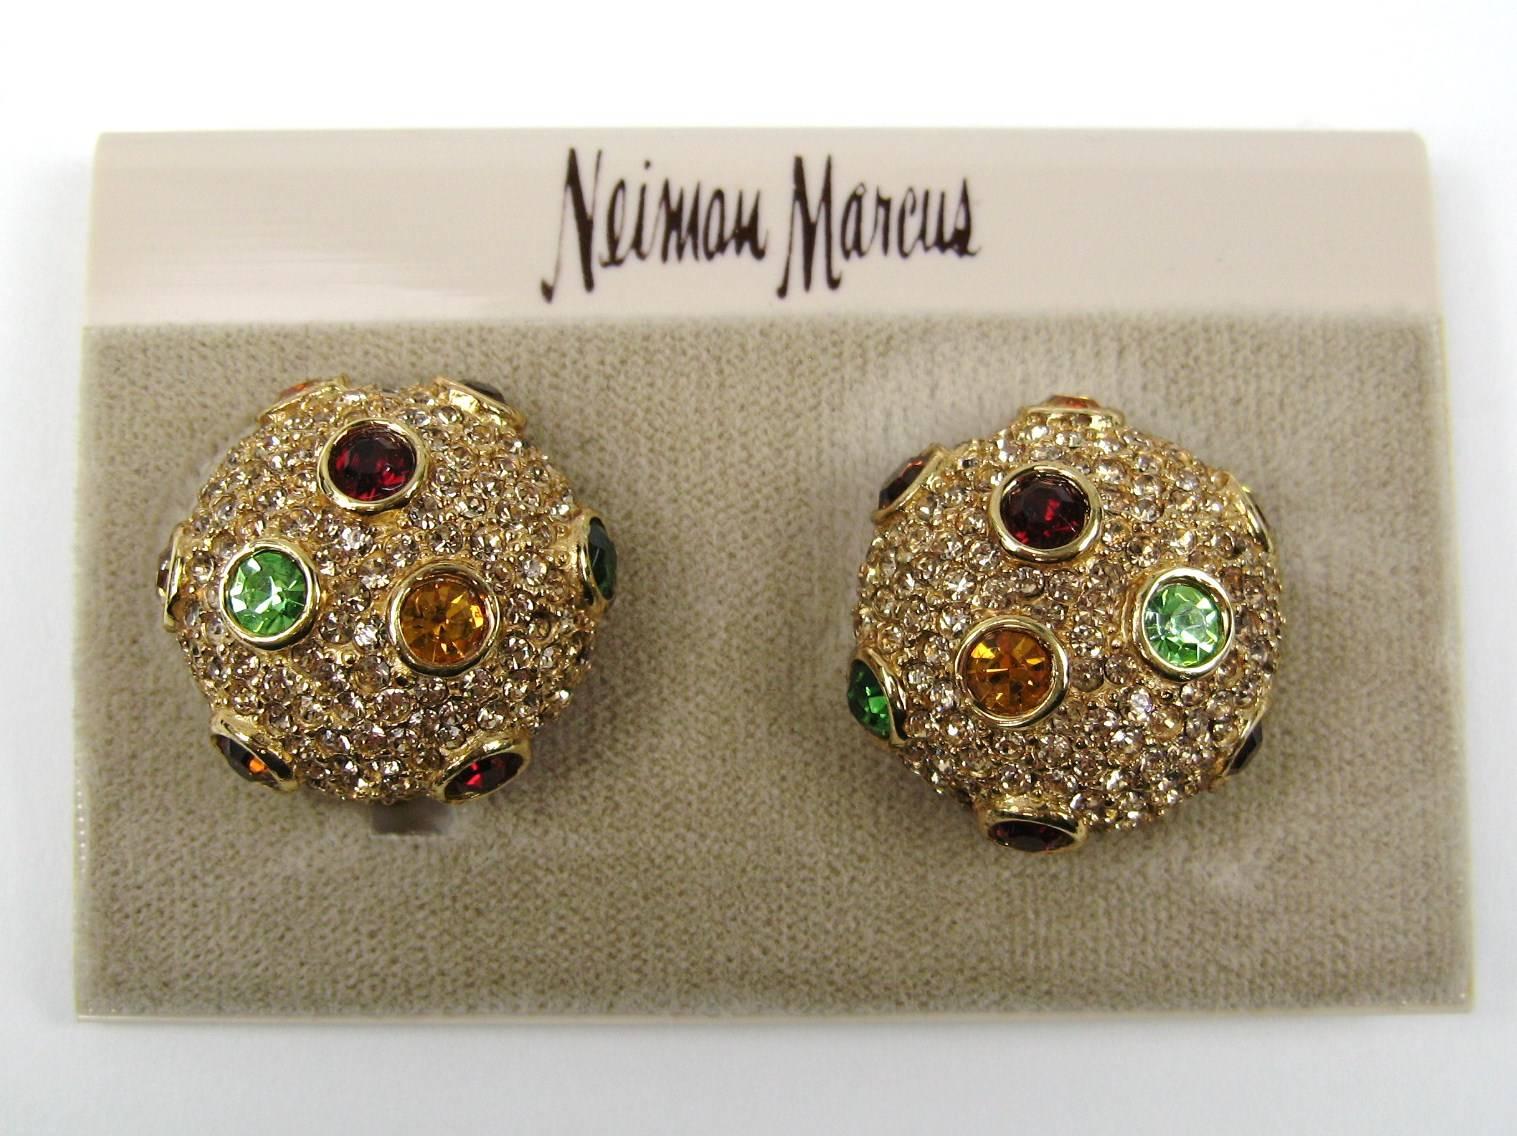 Red, Green, Amber and clear Swarovski crystal Earrings. Still on original earring card. Measures .92 inches in diameter. Visit our store front for hundreds of designer costume jewelry as well as sterling silver. Be sure to follow us to get email